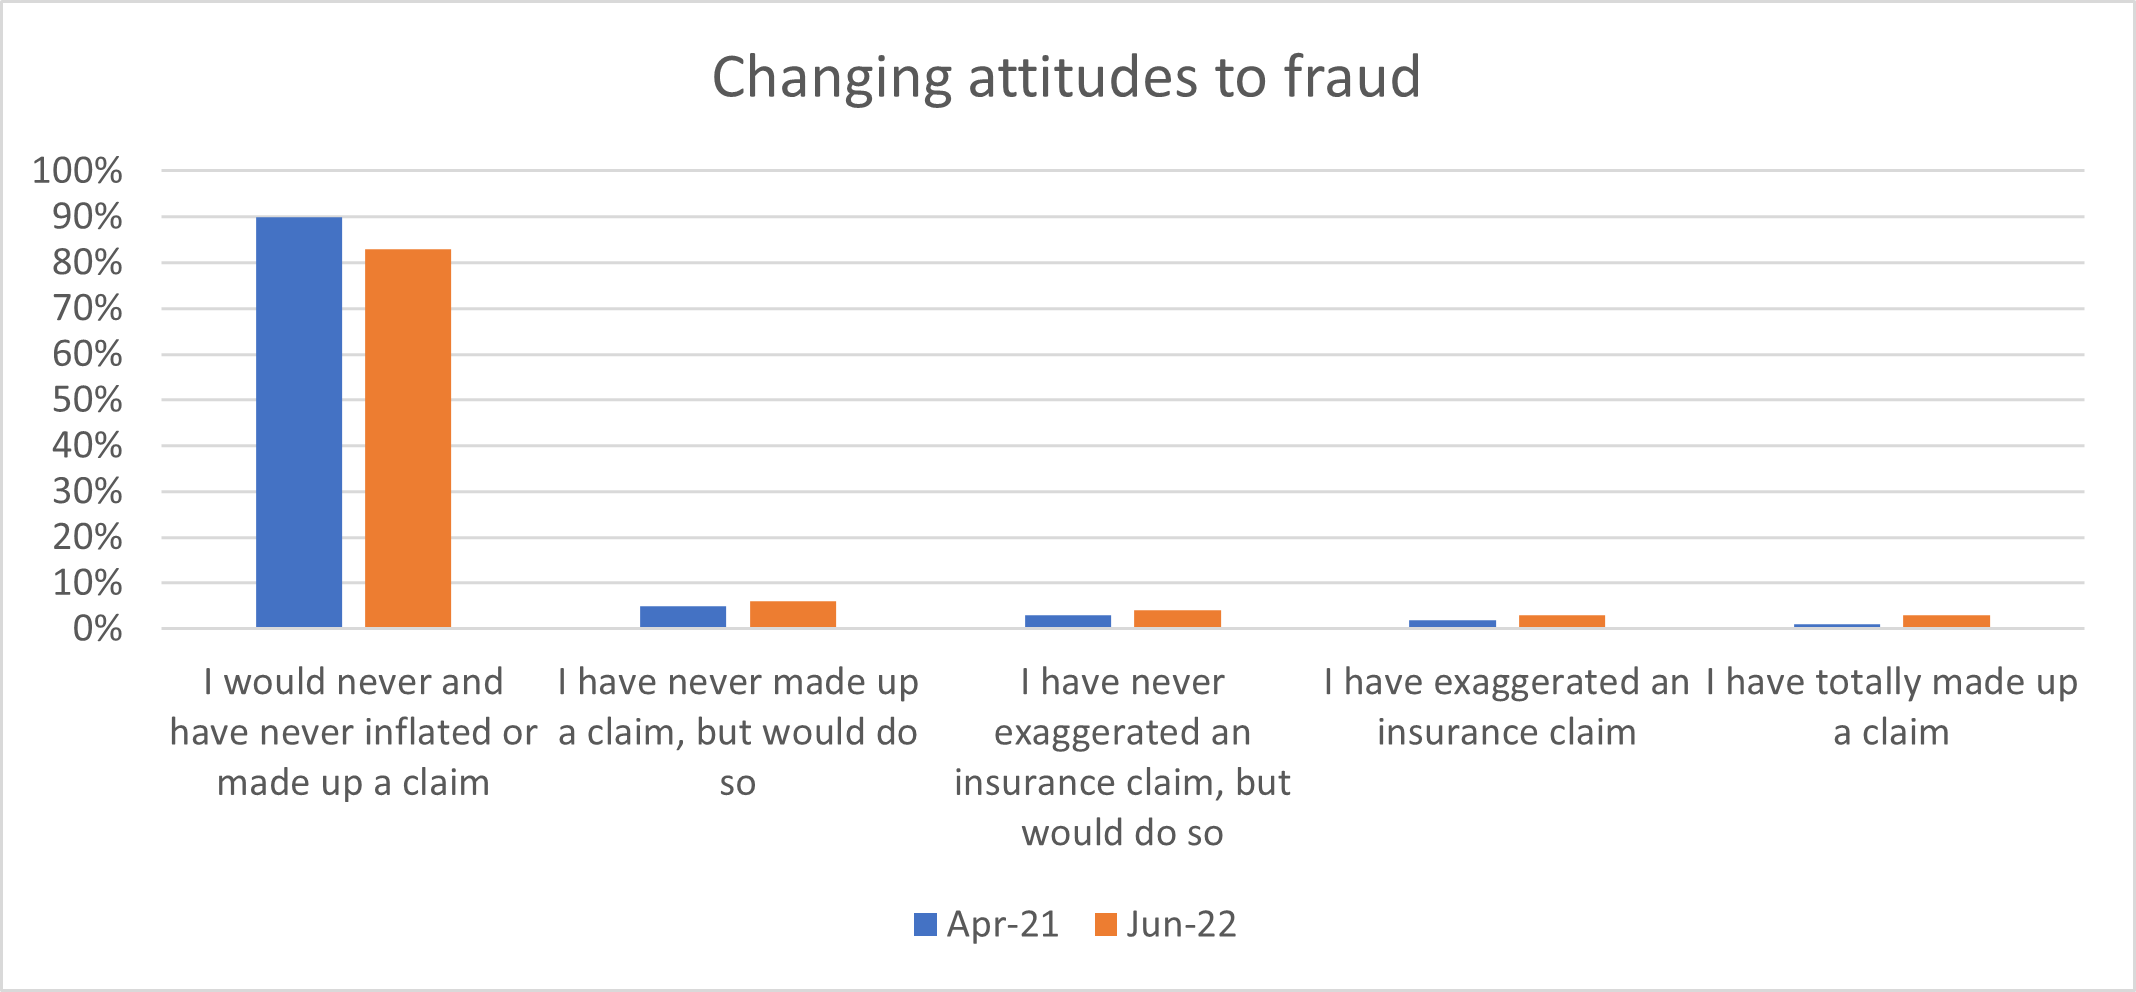 Changing attitudes to fraud